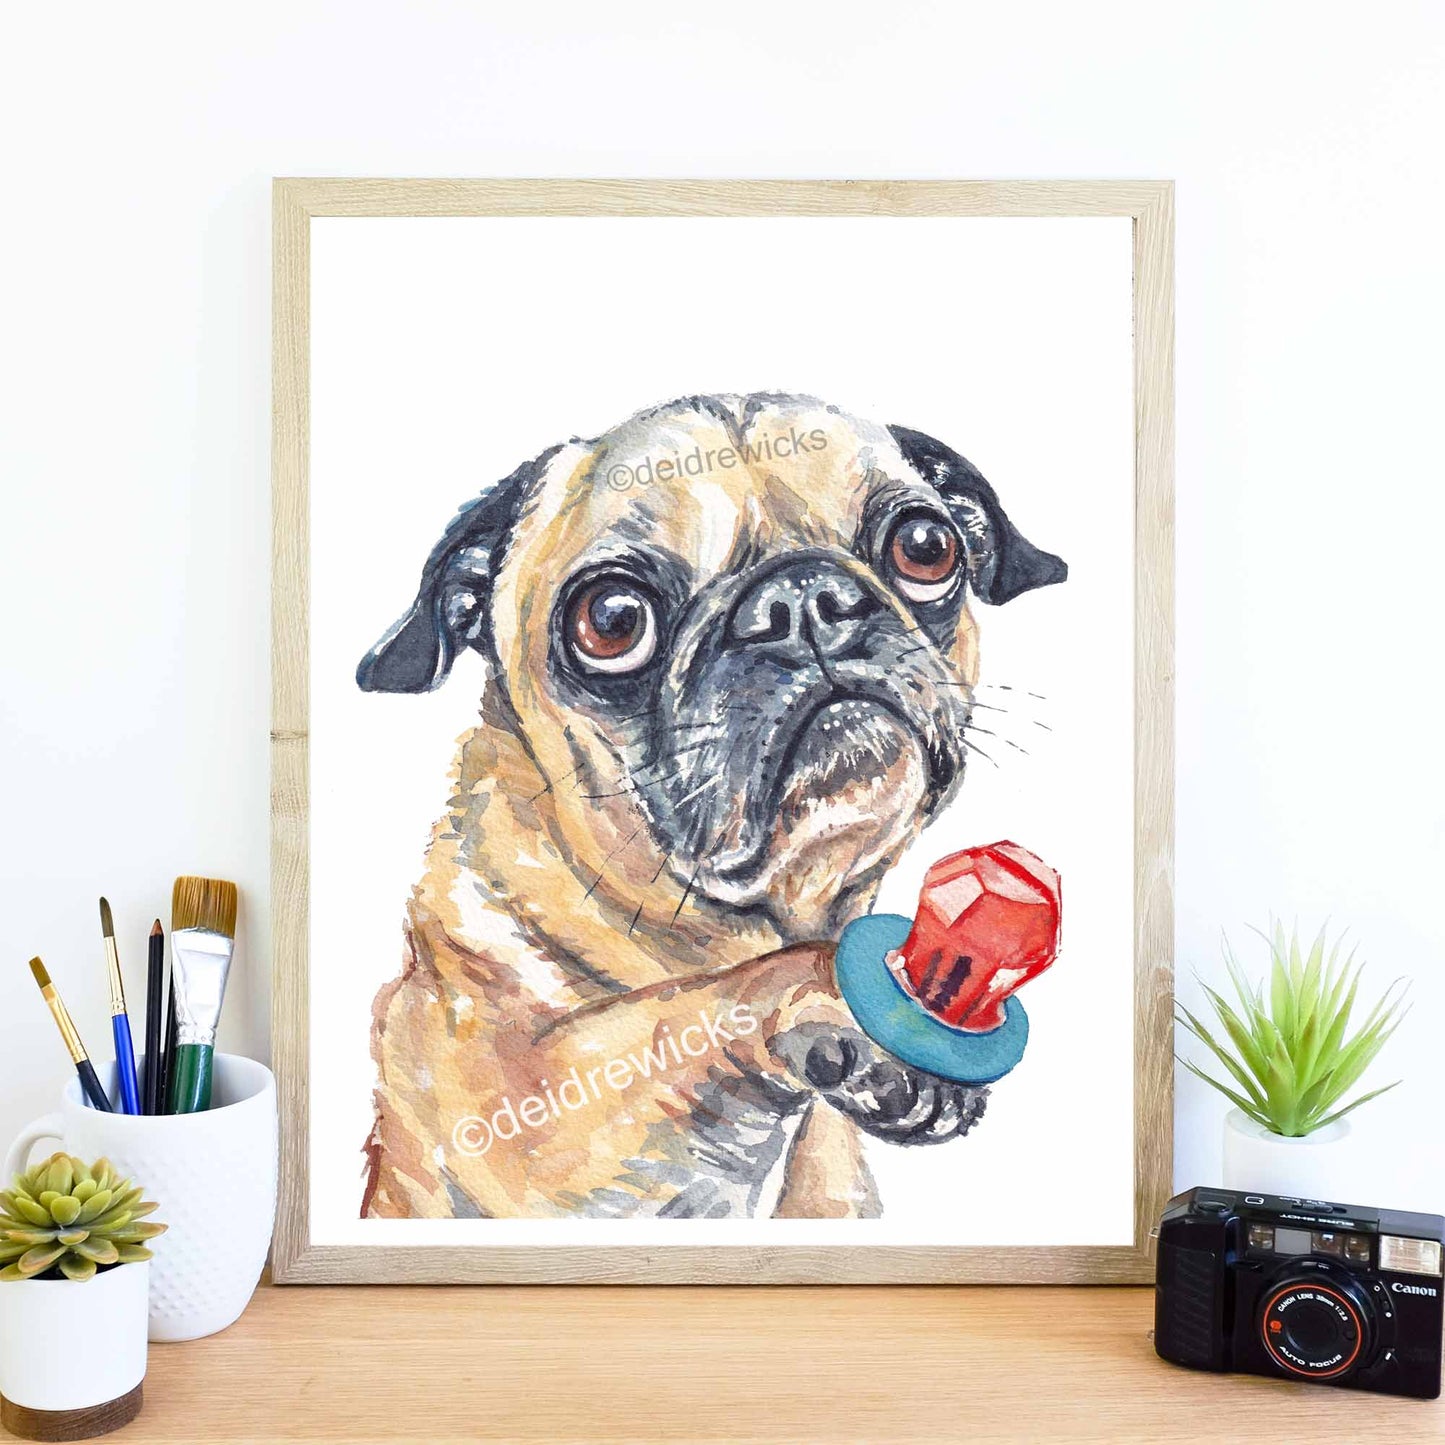 Framed example of a watercolour pug dog painting by Deidre Wicks